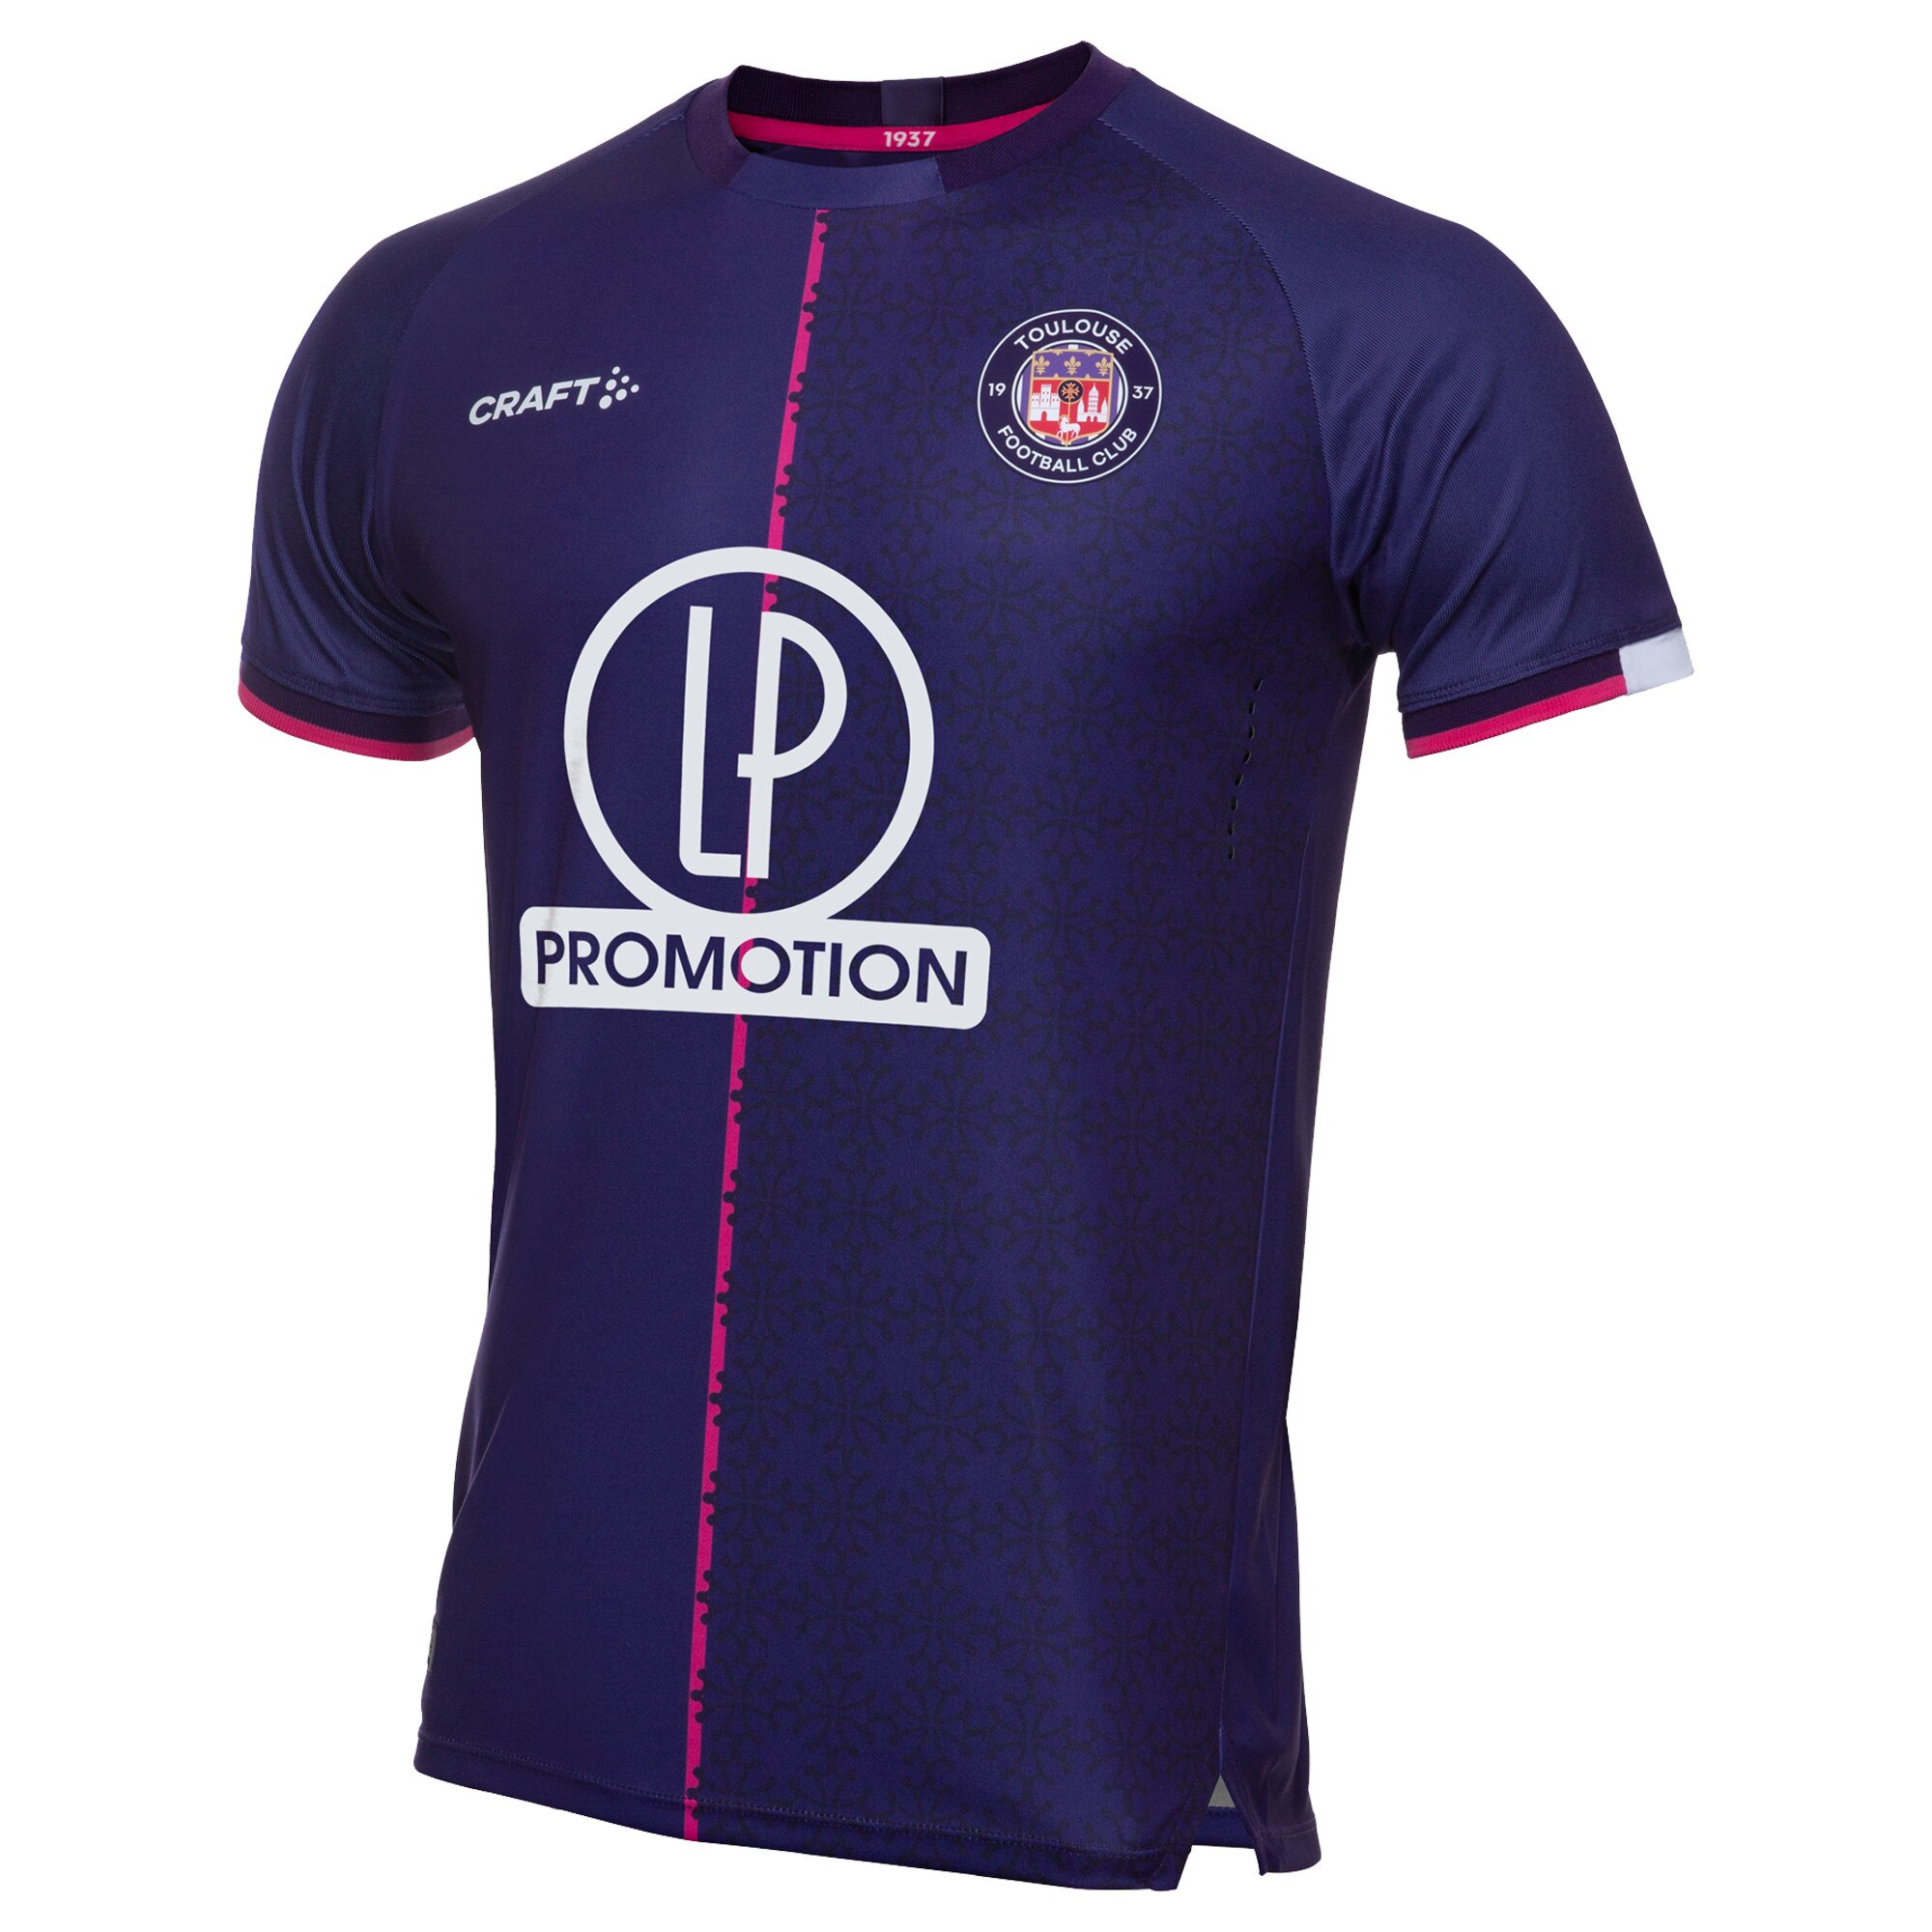 Toulouse Football Club Home Pro Shirt 2021-22 with RAPNOUIL 15 printing